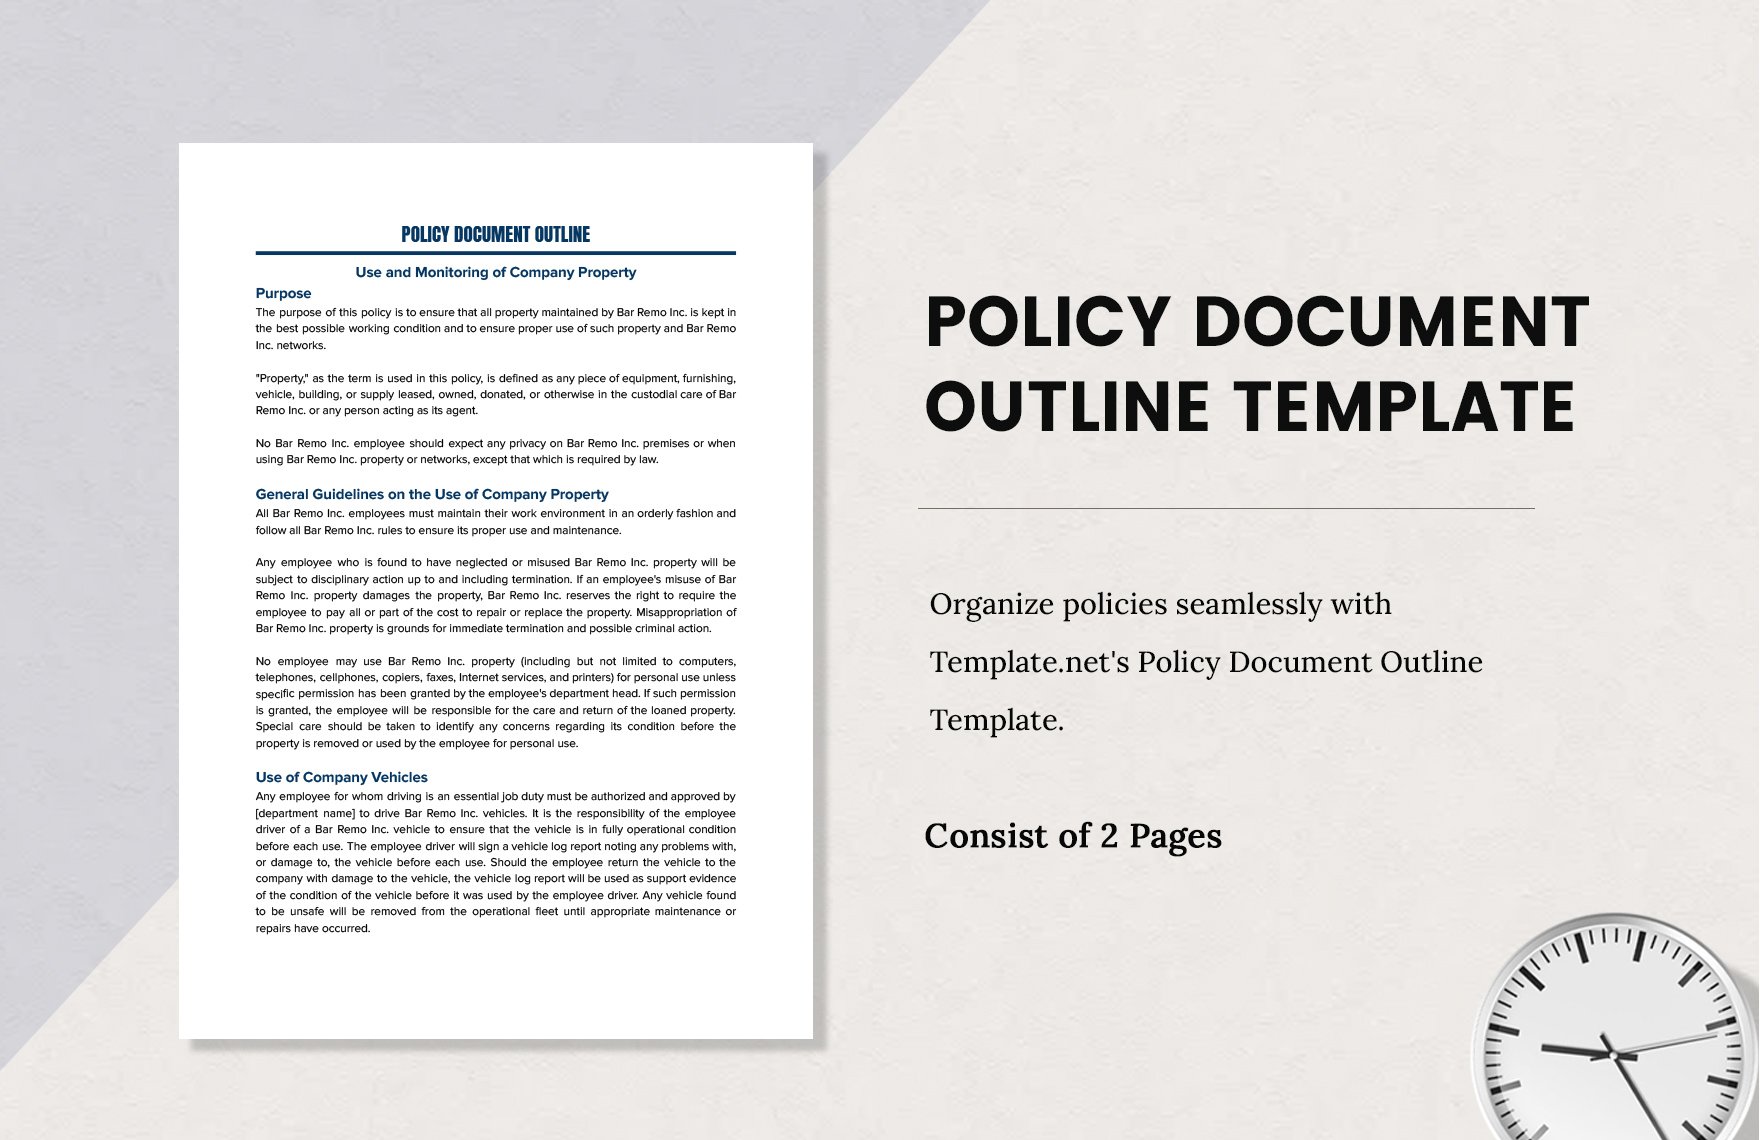 Free Policy Document Outline Template